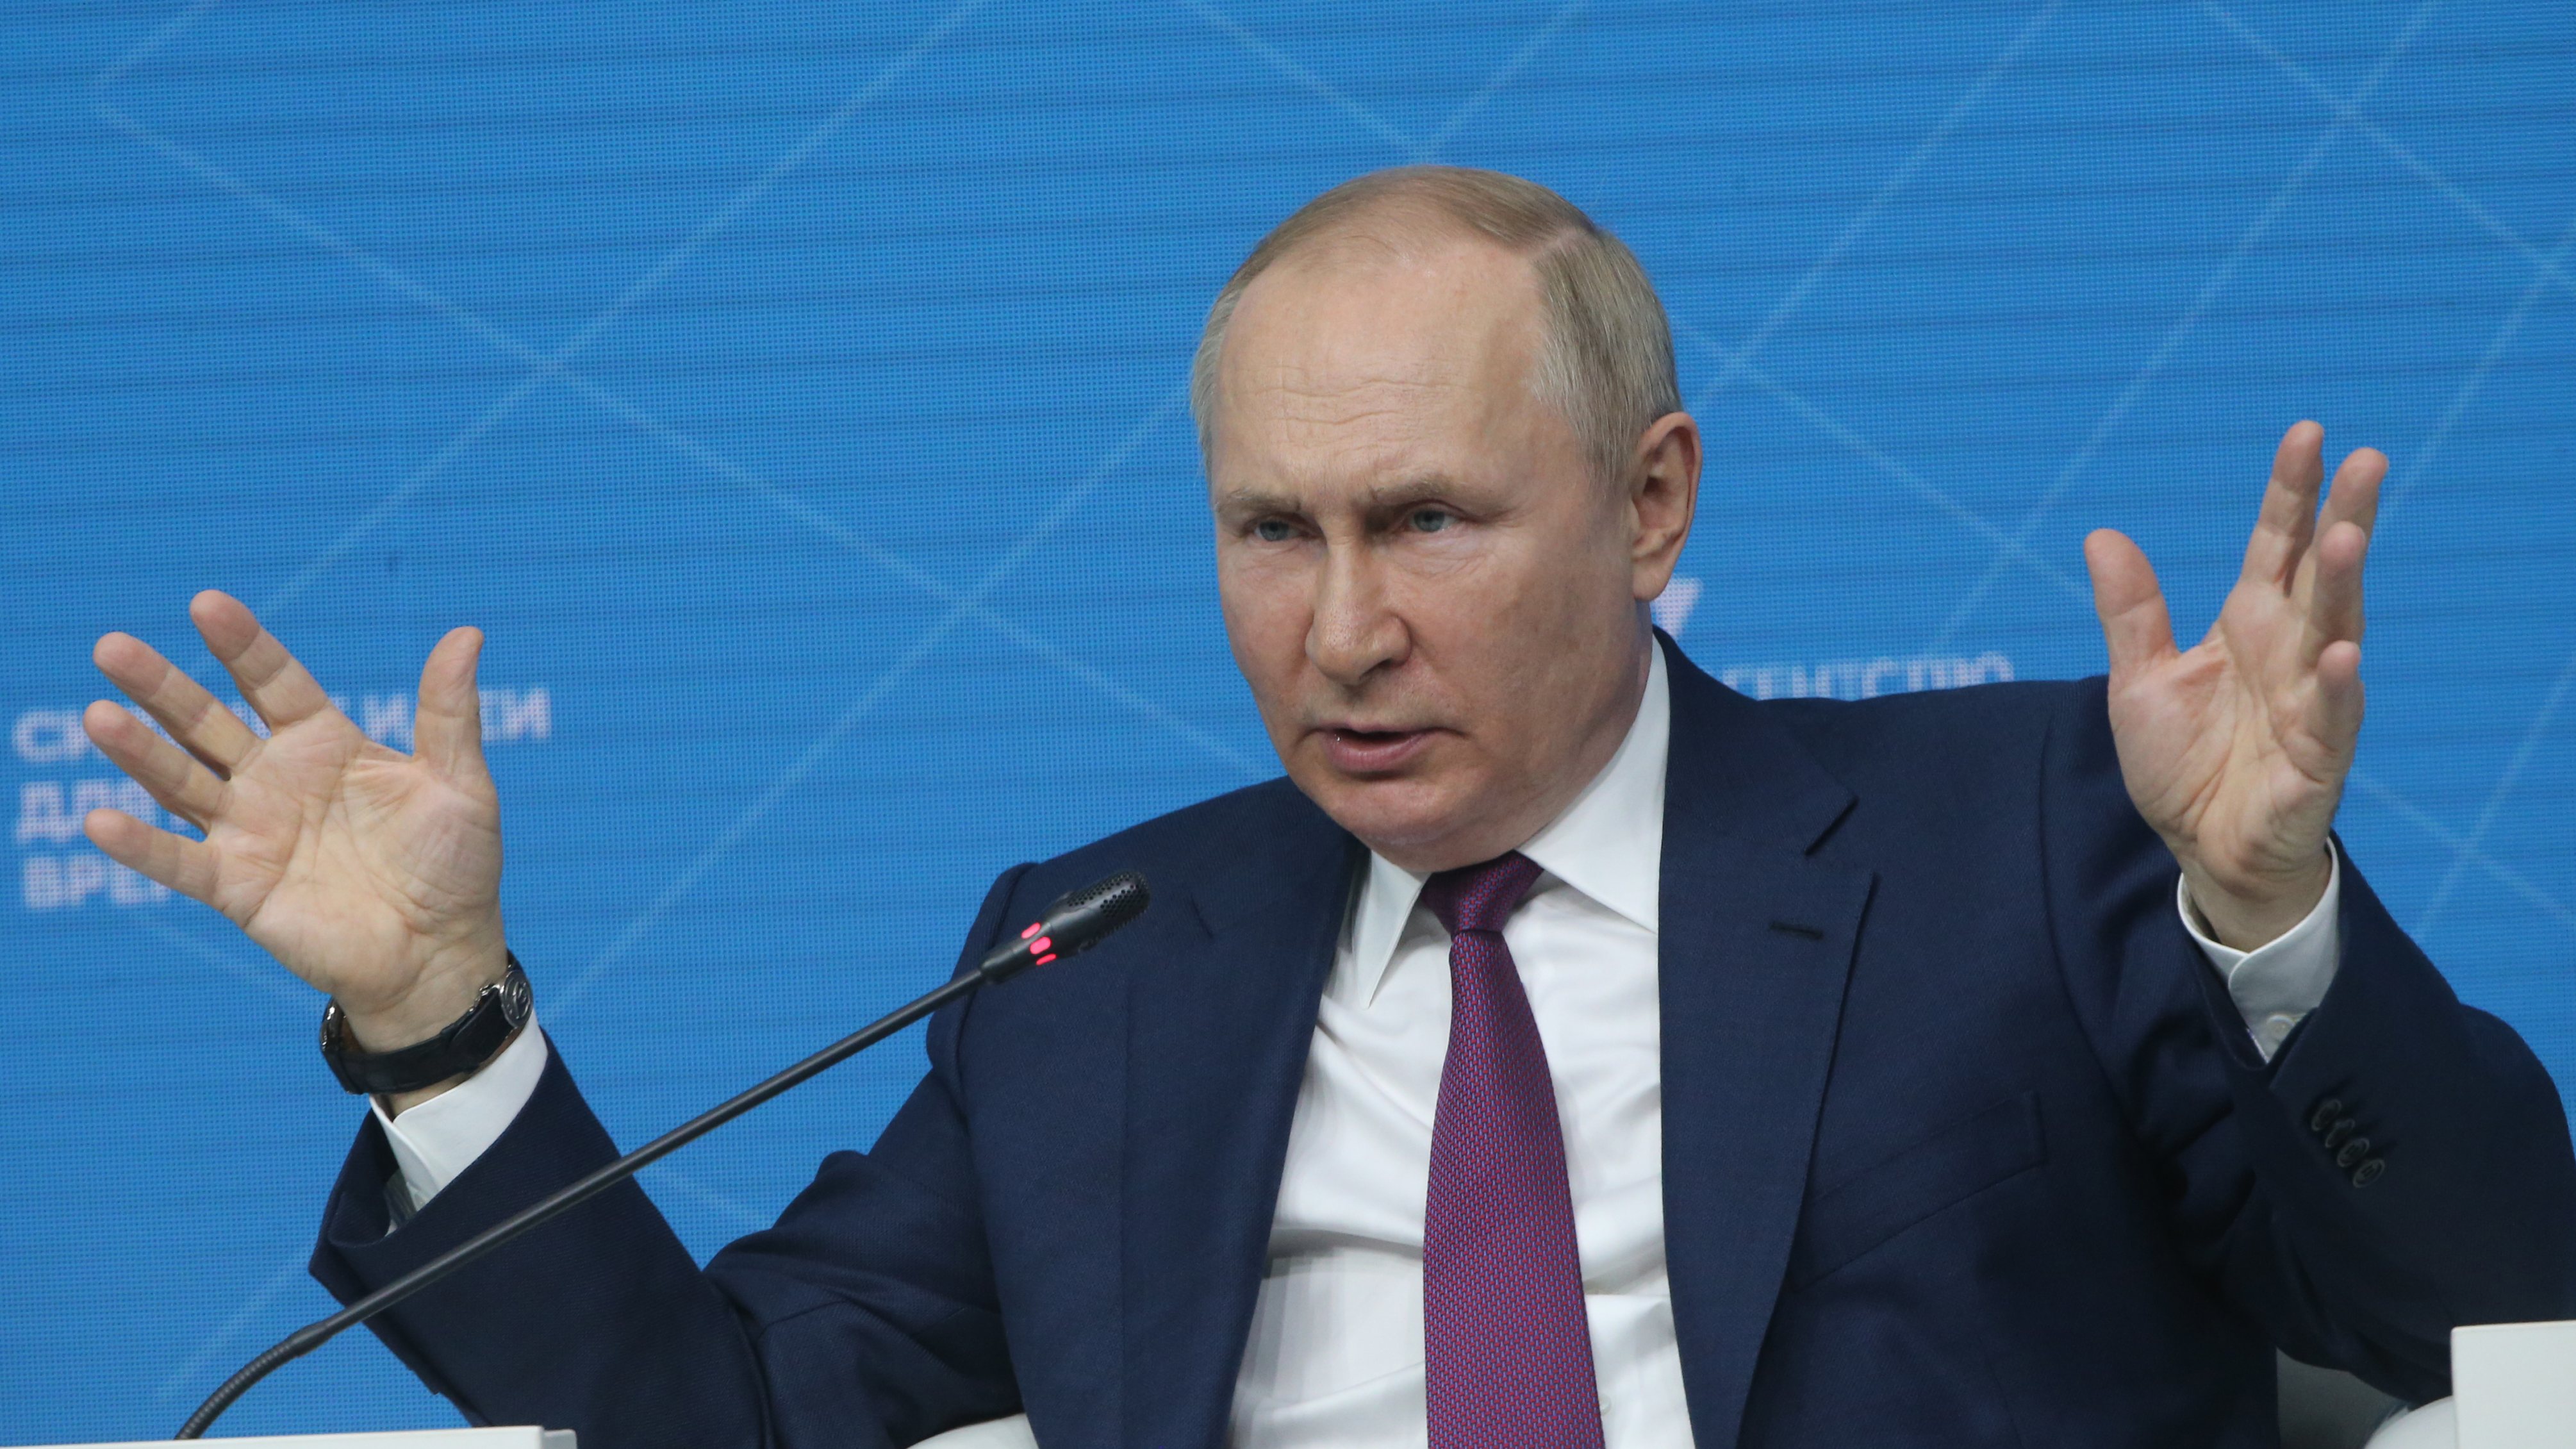 Putin Attends Economic Forum Hosted By Agency for Strategic Initiatives